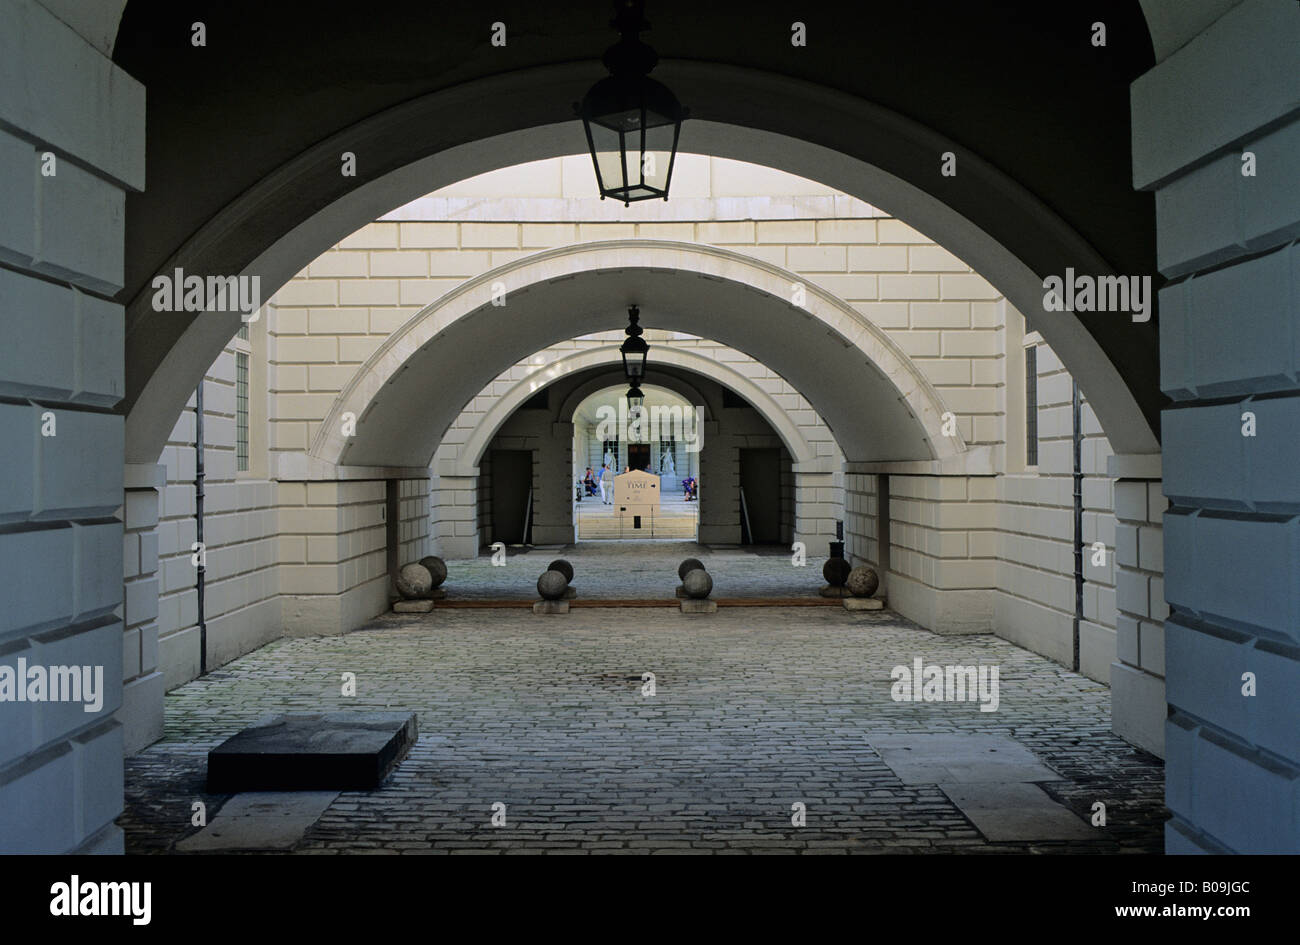 Undercroft of The Old Royal Naval College, Greenwich, London, England, UK Stock Photo